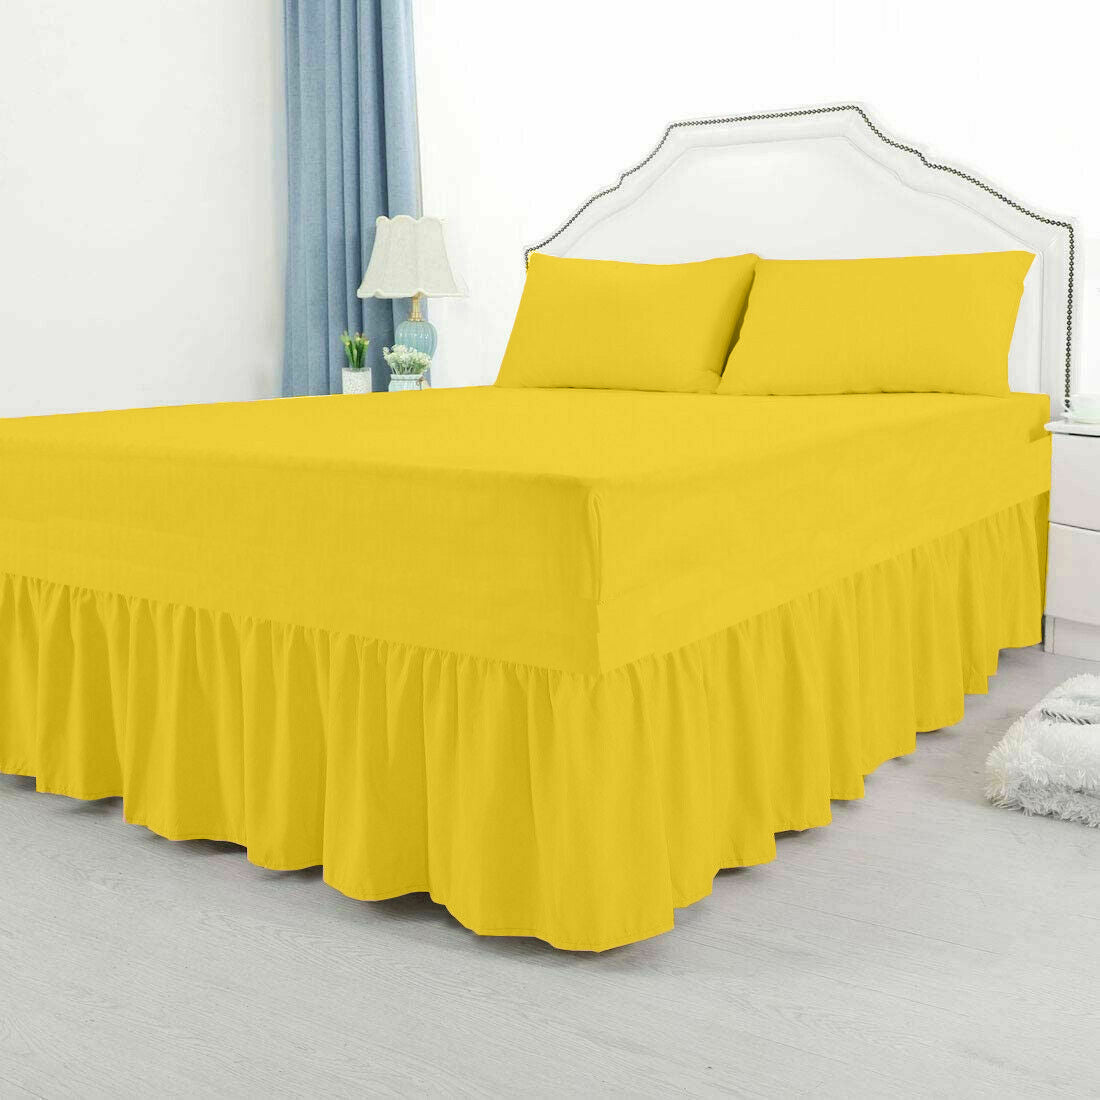 Special Sizes Extra Deep Fire Retardant Fitted Valance Sheet King S. King Size frill 20" to 30" Polycotton Bed Sheets ⭐⭐⭐⭐⭐